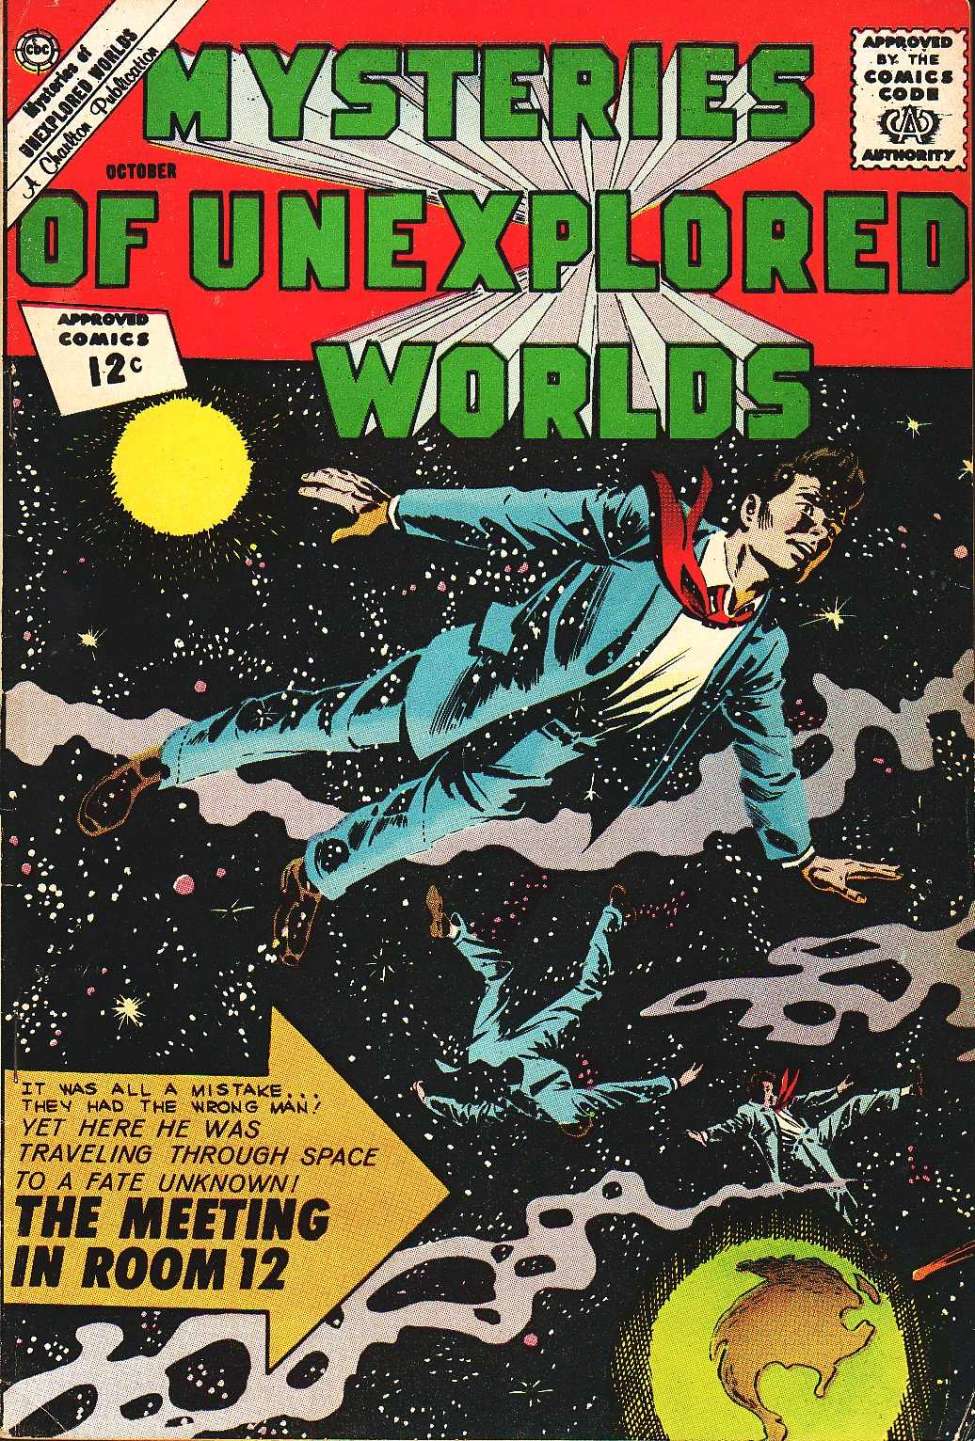 Book Cover For Mysteries of Unexplored Worlds 32